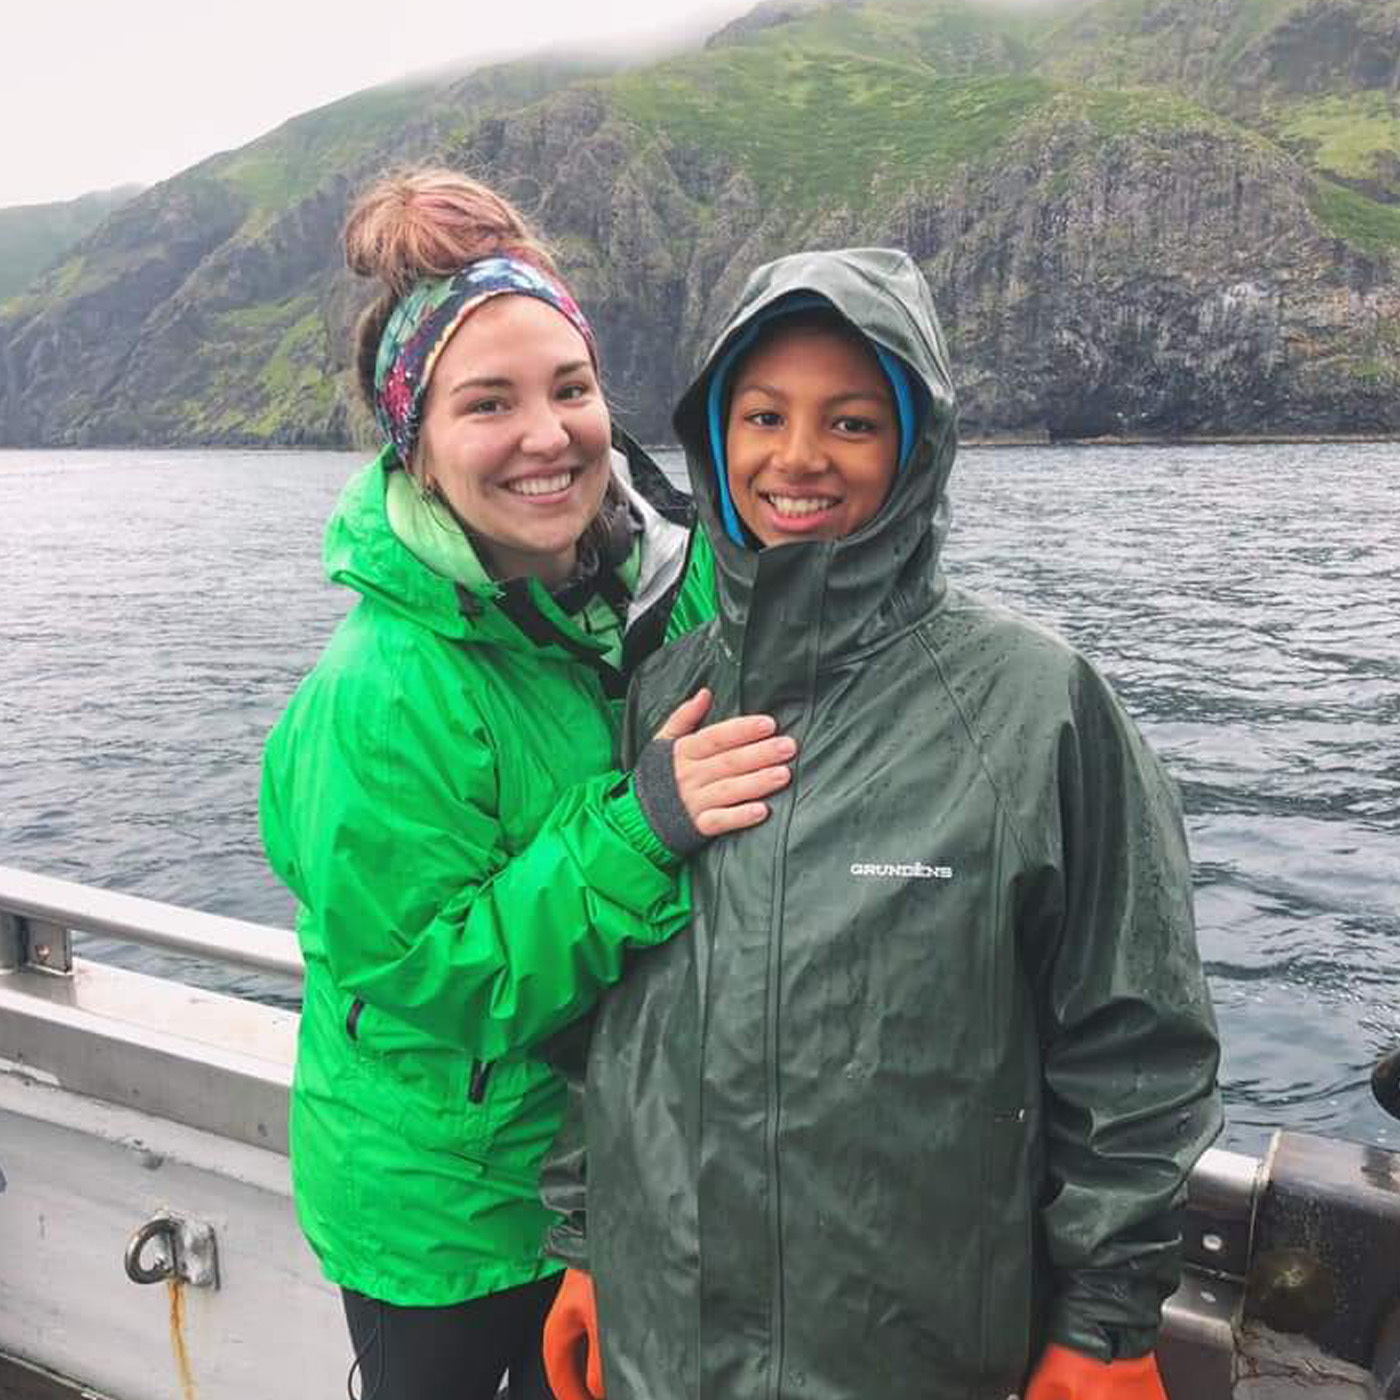 Malerie standing on a boat in Alaska with her family member. They are both smiling despite the cloudy and rainy day. Beautiful mountains can be seen behind them.